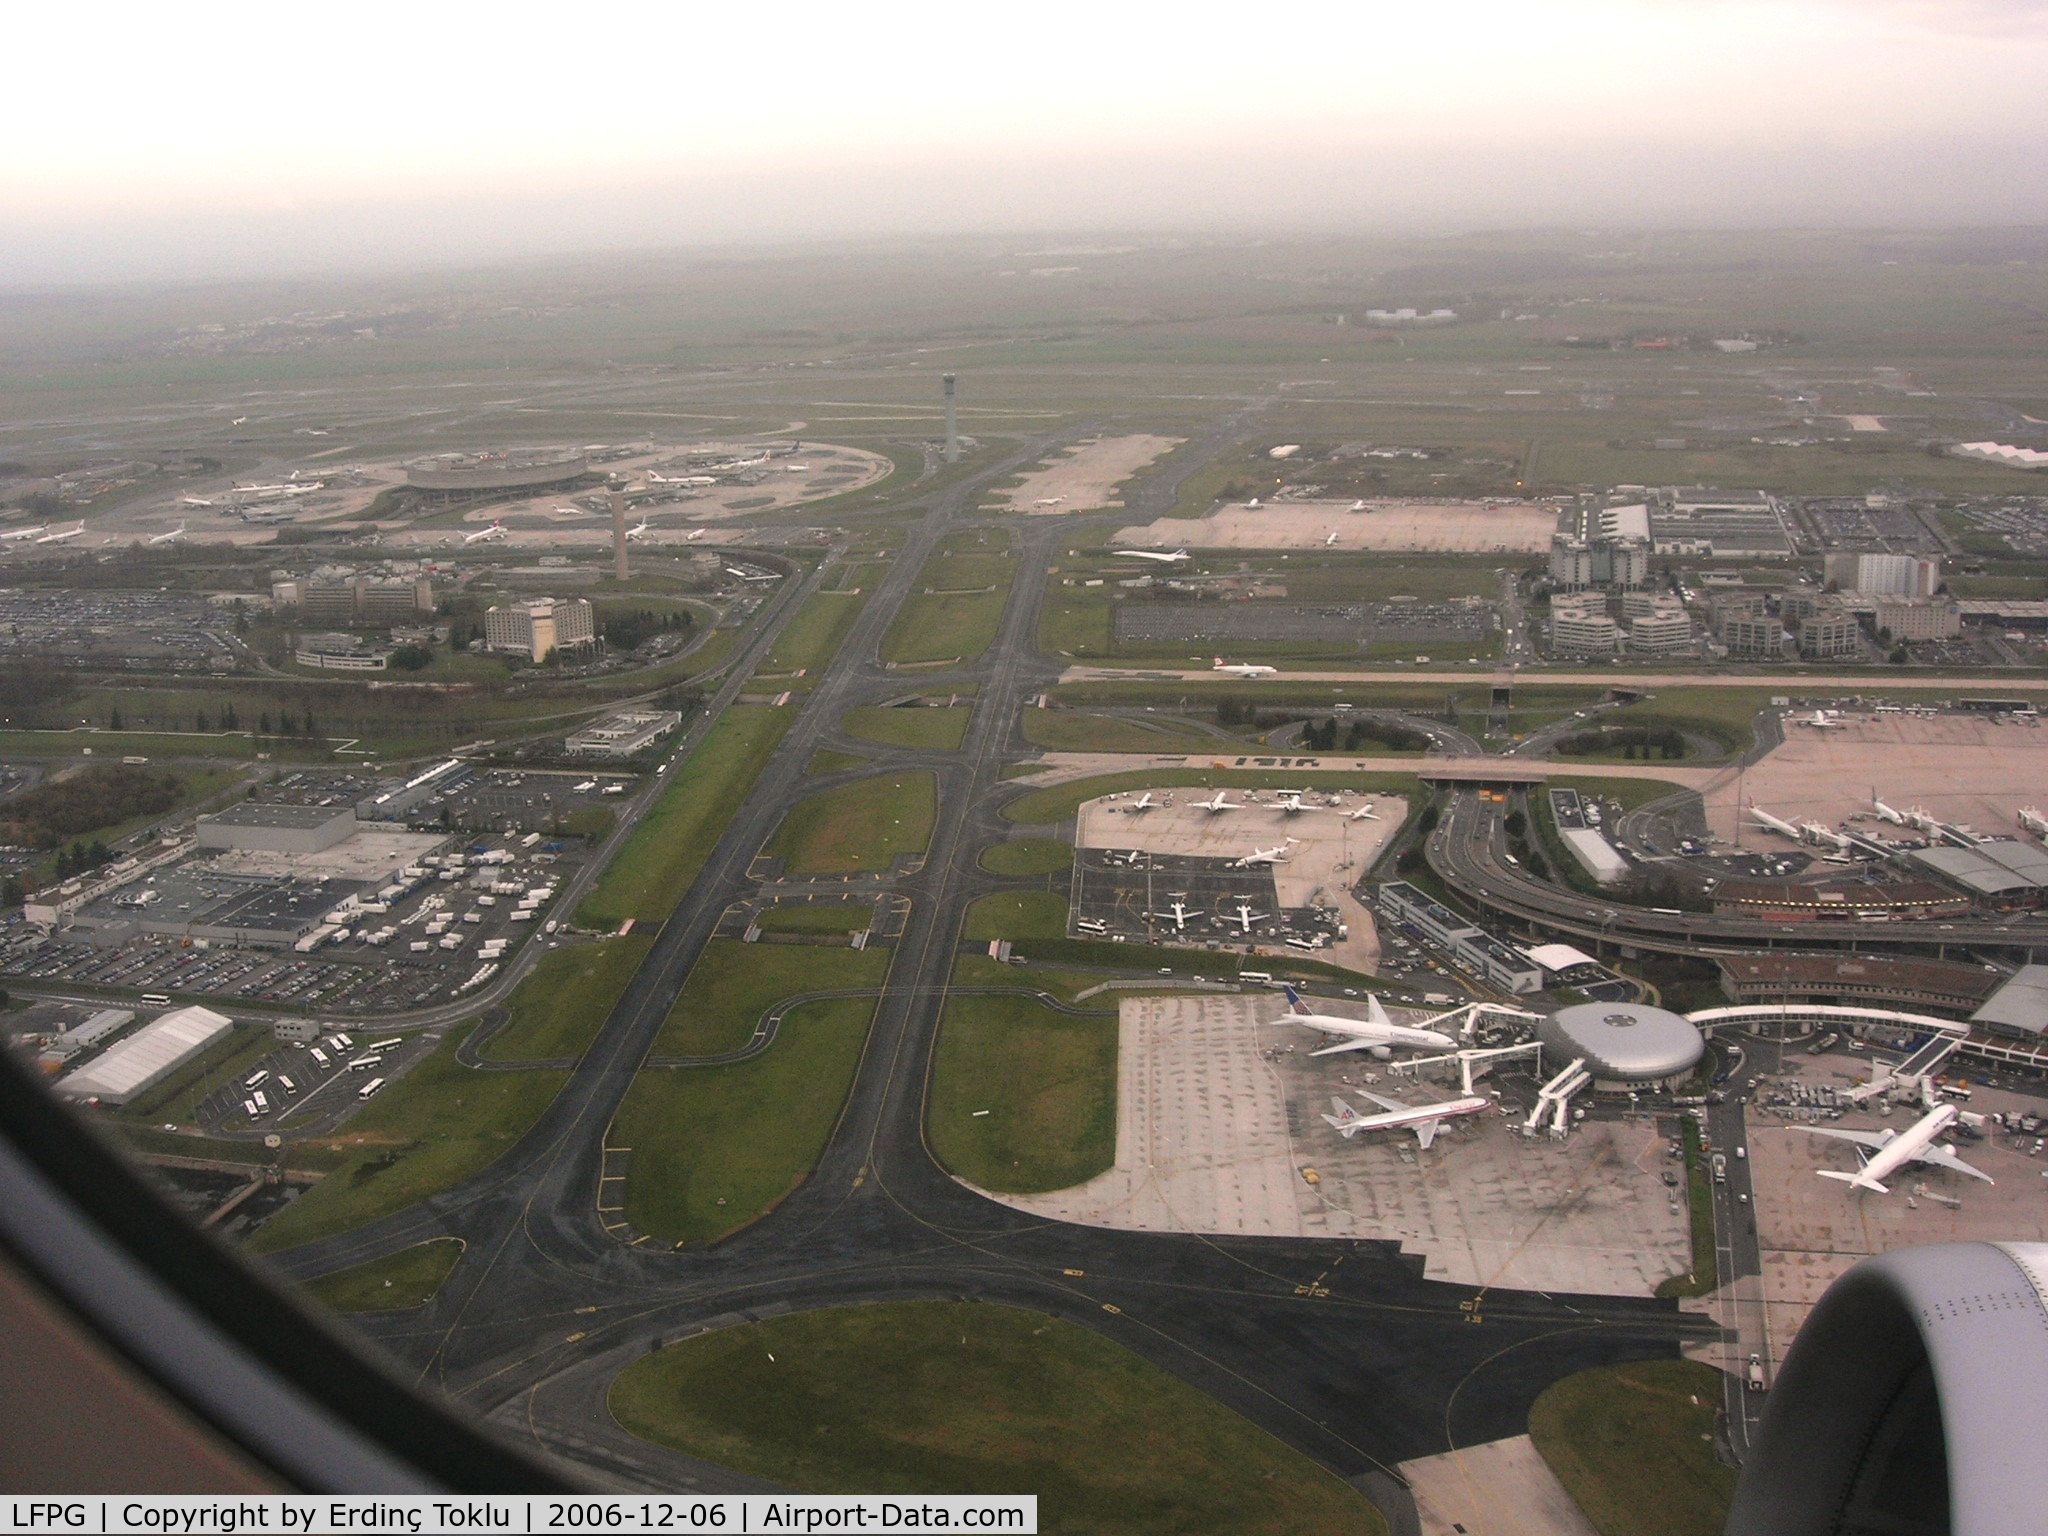 Paris Charles de Gaulle Airport (Roissy Airport), Paris France (LFPG) - Roissy CDG. Taxiways Fox (right) and November. T1 in the background to the left.